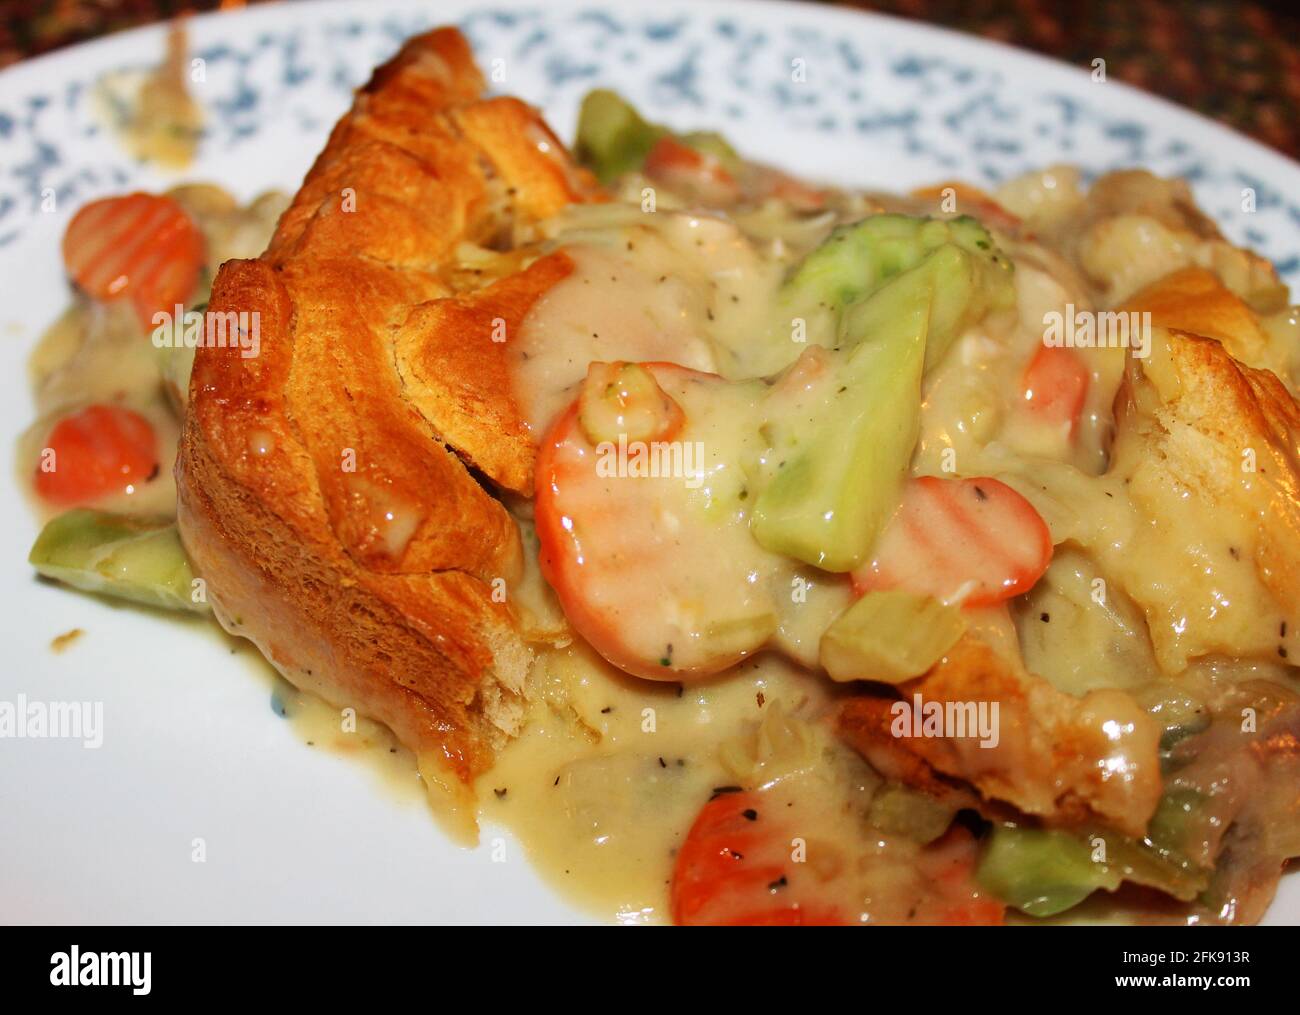 Close-up of a serving of chicken pot pie on a plate. Stock Photo